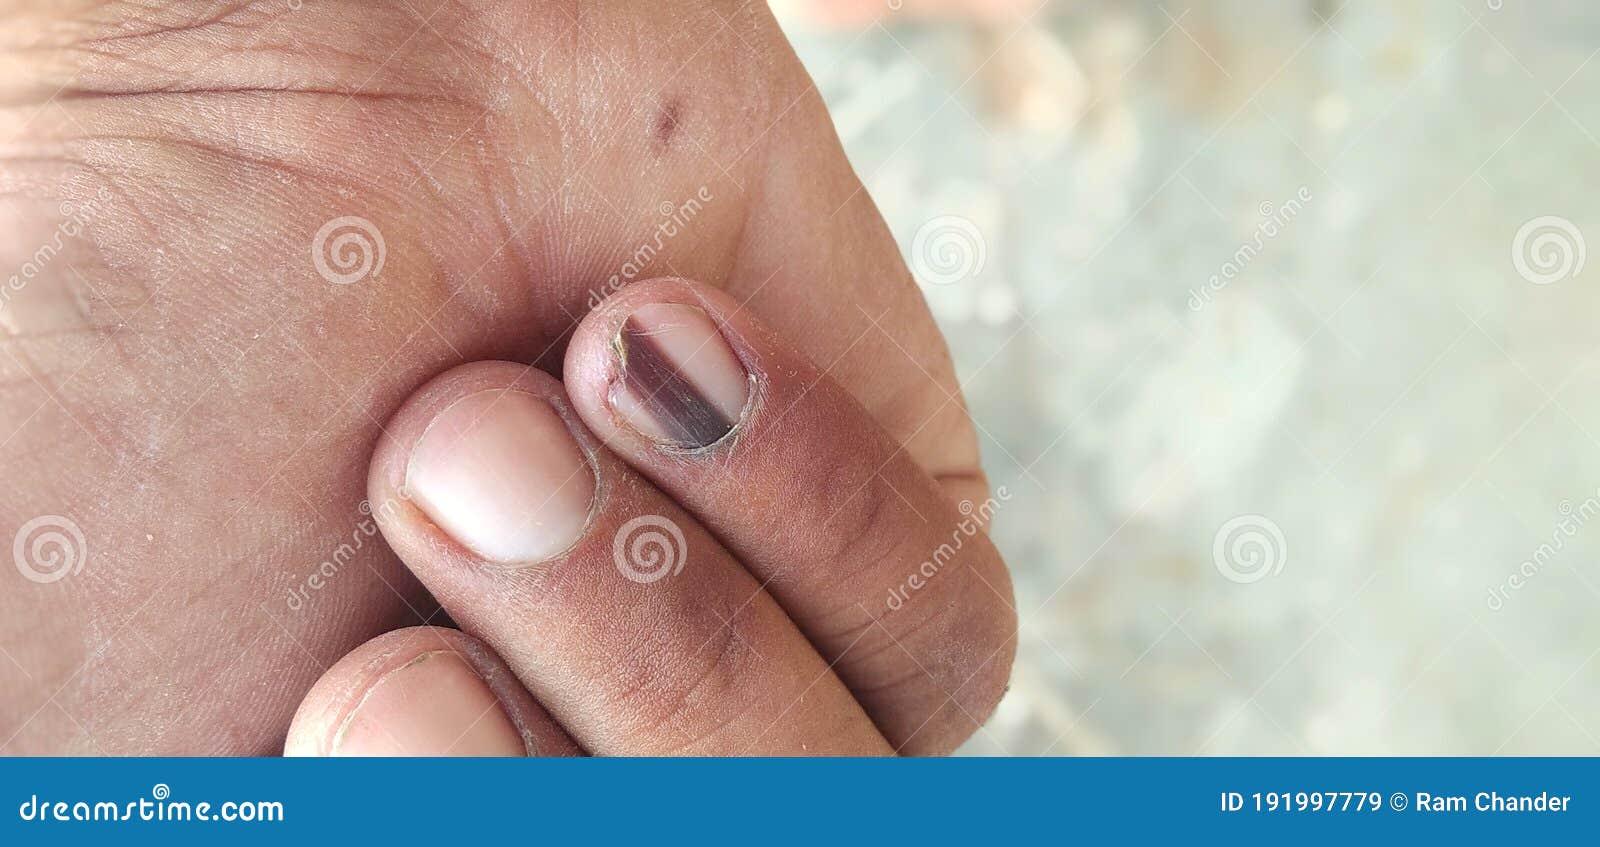 Habit Tic Nail Deformity - American Osteopathic College of Dermatology  (AOCD)